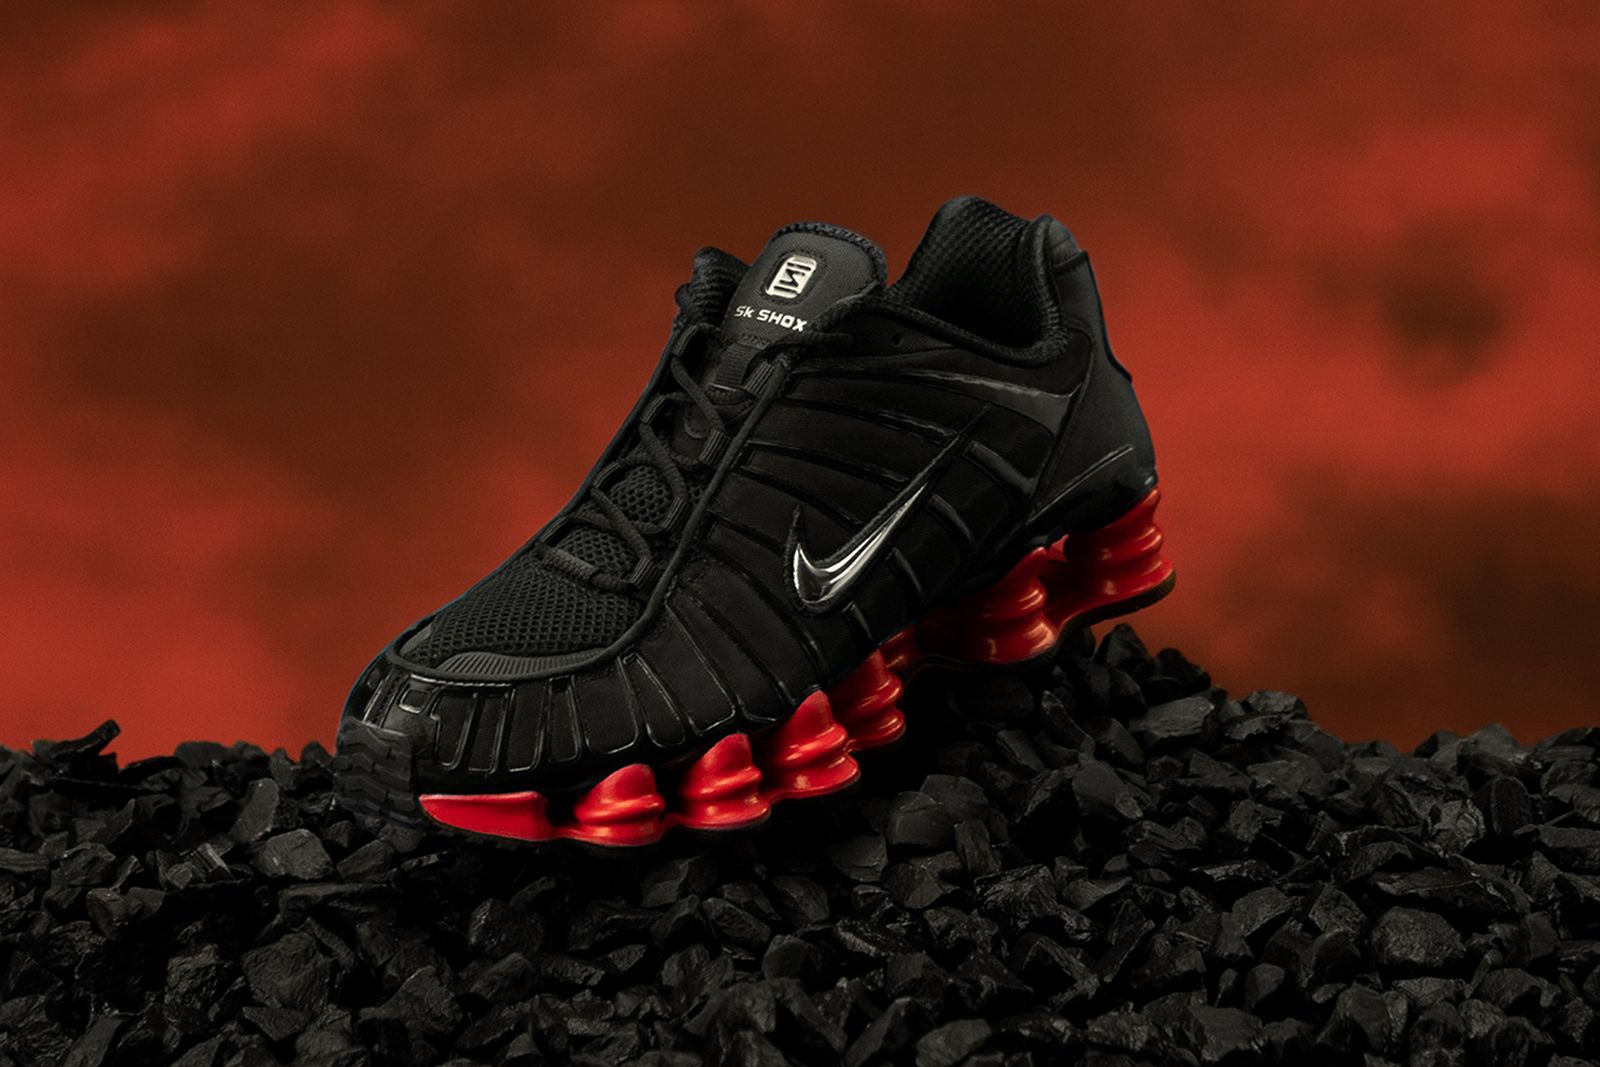 Skepta x Nike Shox TL: Official Image & Where to Buy Today